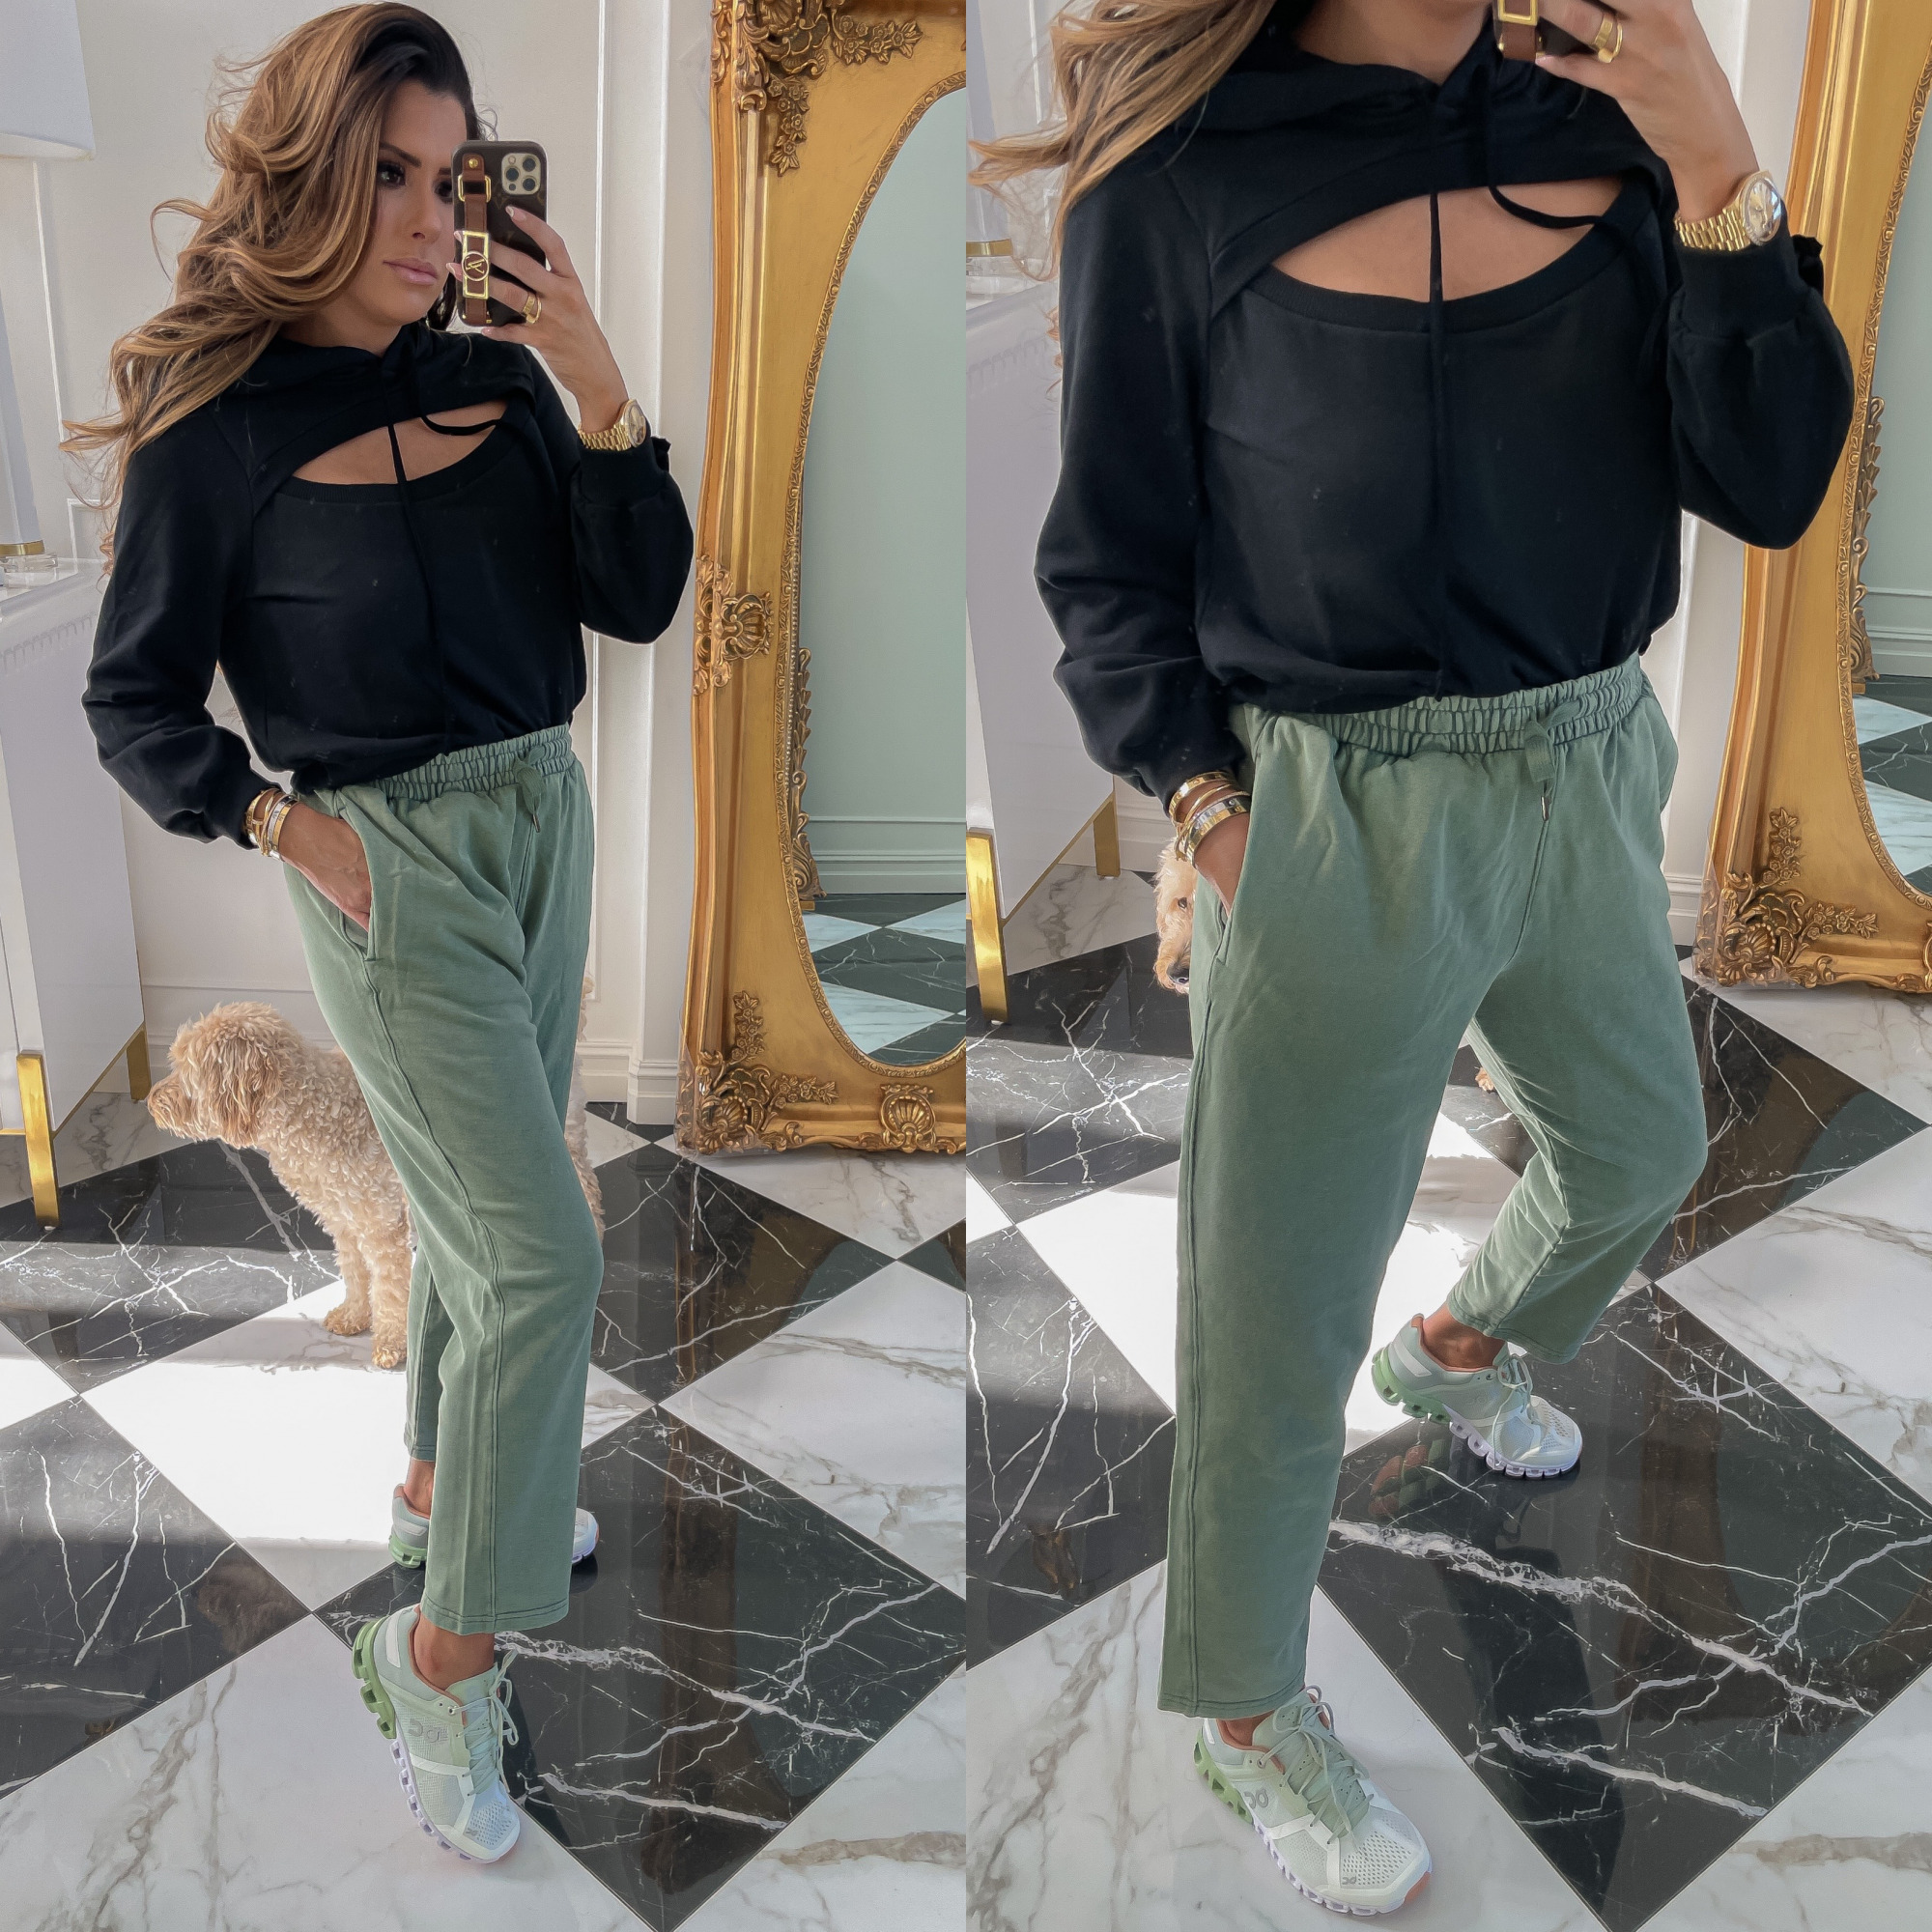 dstrom Anniversary Sale 2021 Picks, best of NSALE 2021, Nordstrom sale must haves blog post, Emily gemma | Nordstrom Anniversary Sale US fashion blog, The Sweetest Thing: image of Emily Gemma wearing a Nordstrom peekaboo hoodie, drawstring pants, and athletic sneakers. 